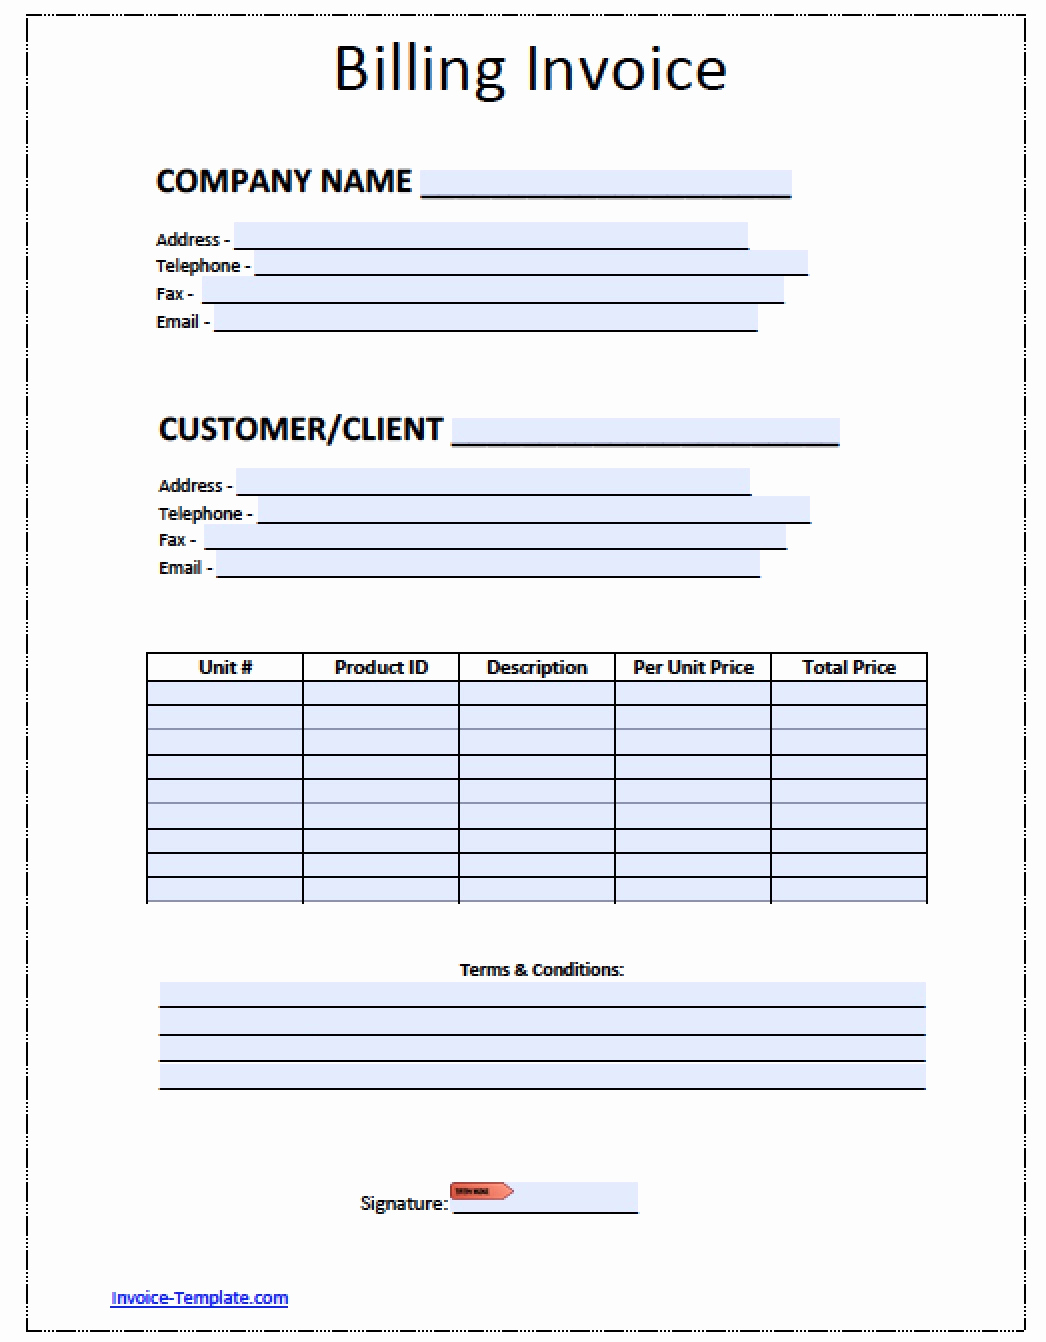 Microsoft Word Invoice Template Free Inspirational Free Blank Invoice Template for Excel